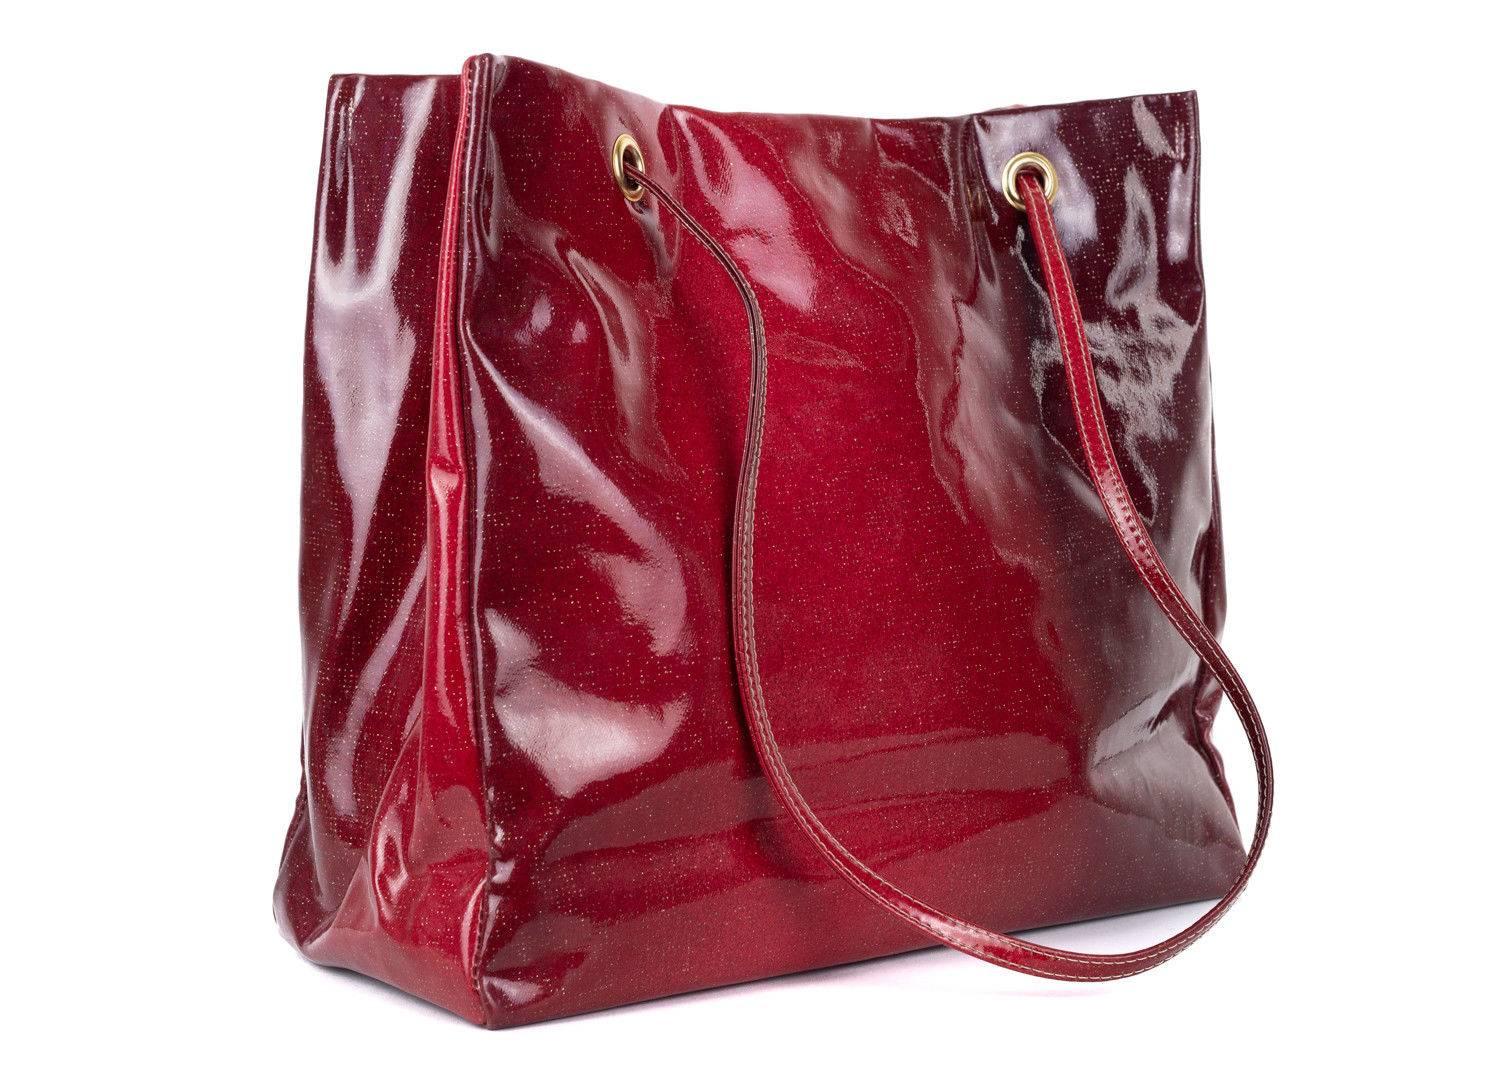 Roberto Cavalli red patent leather tote bag.This large tote bag features a glossy fnish and silver glitter specs with a slgith ombre effect. This large tote bag is perfect to store all your everyday essentials and can be paired with any outfit for a